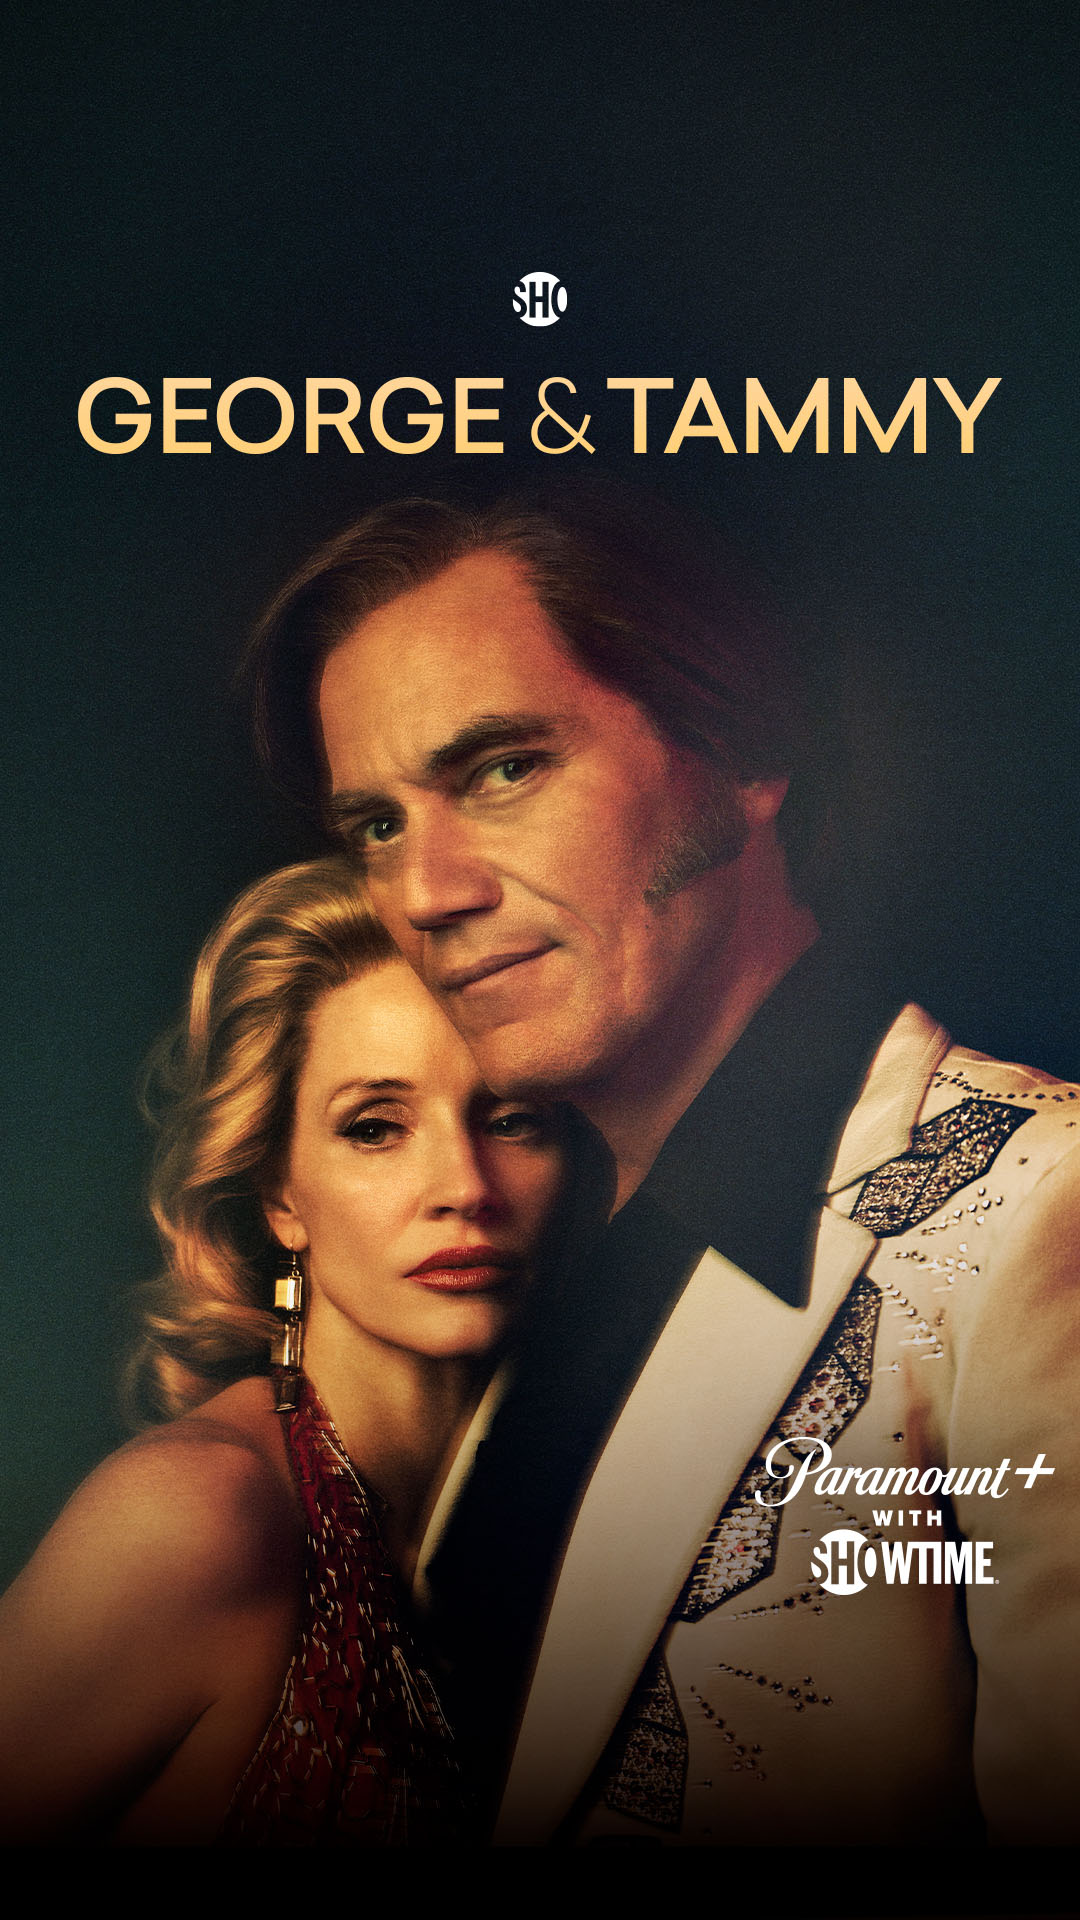 George & Tammy, on Paramount+ with Showtime